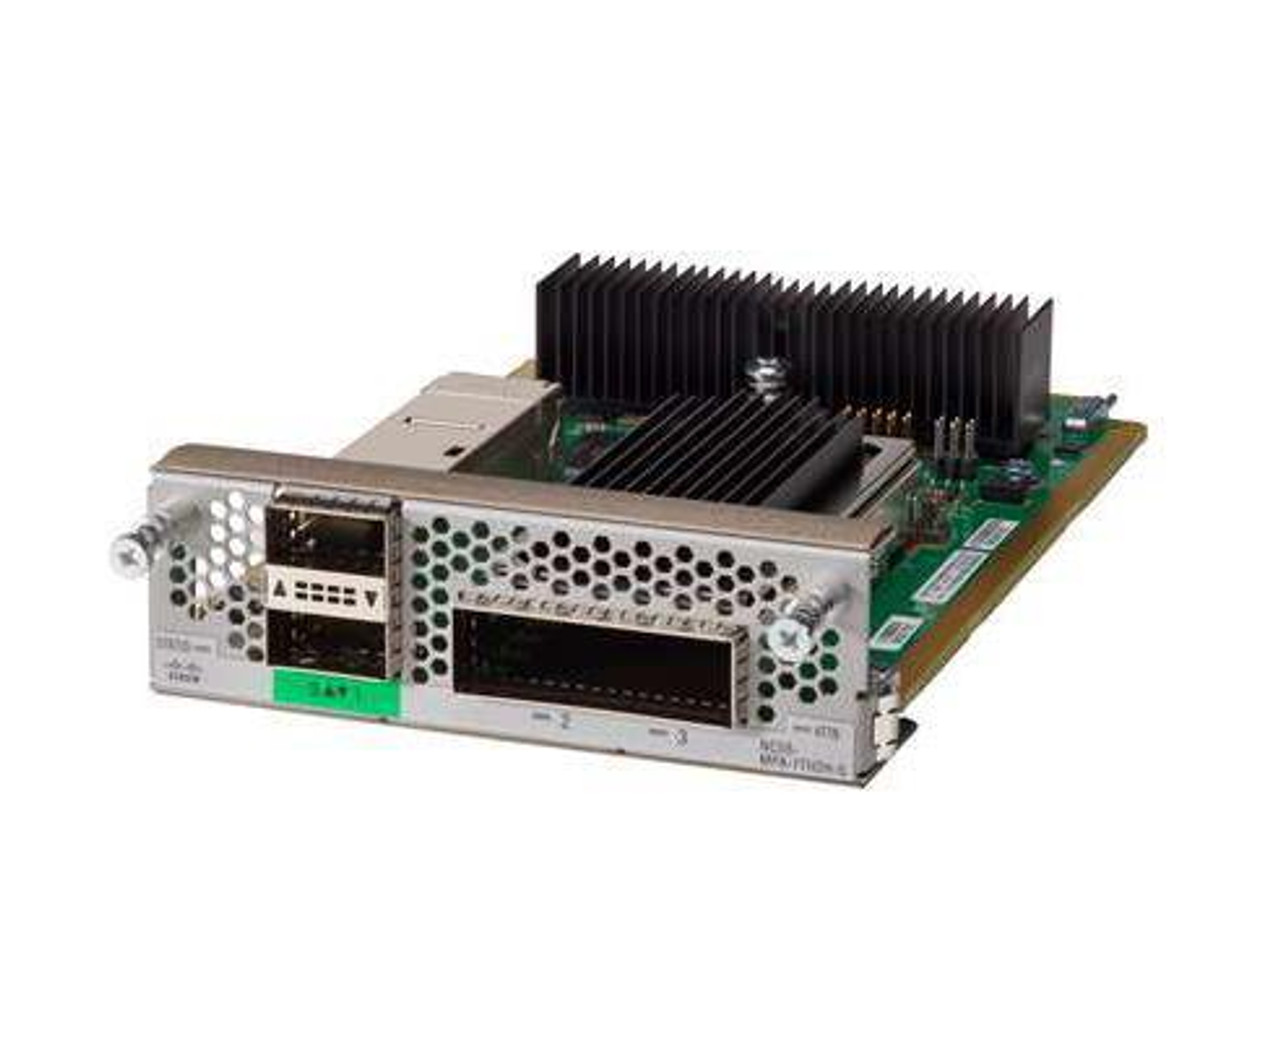 NC55-MPA-1TH2H-S= Cisco NCS 5500 1-Port 200Gbps CFP2 and 2-Ports 100Gbps QSFP28 MPA Modular Port Adapter (Refurbished)